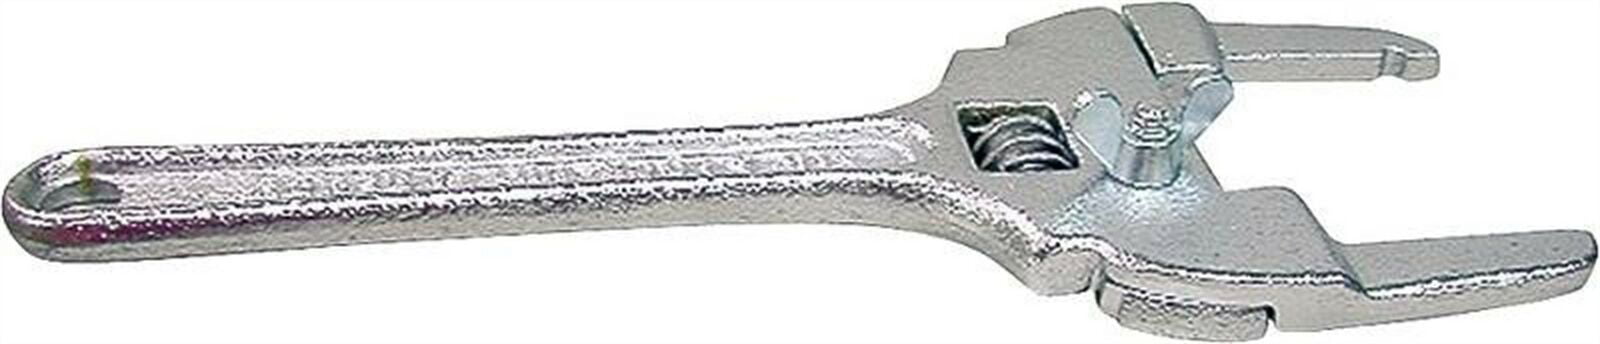 NEW MINTCRAFT 9708439 1 1/8" PROFESSIONAL QUALITY COMBINATION WRENCH HAND TOOL 